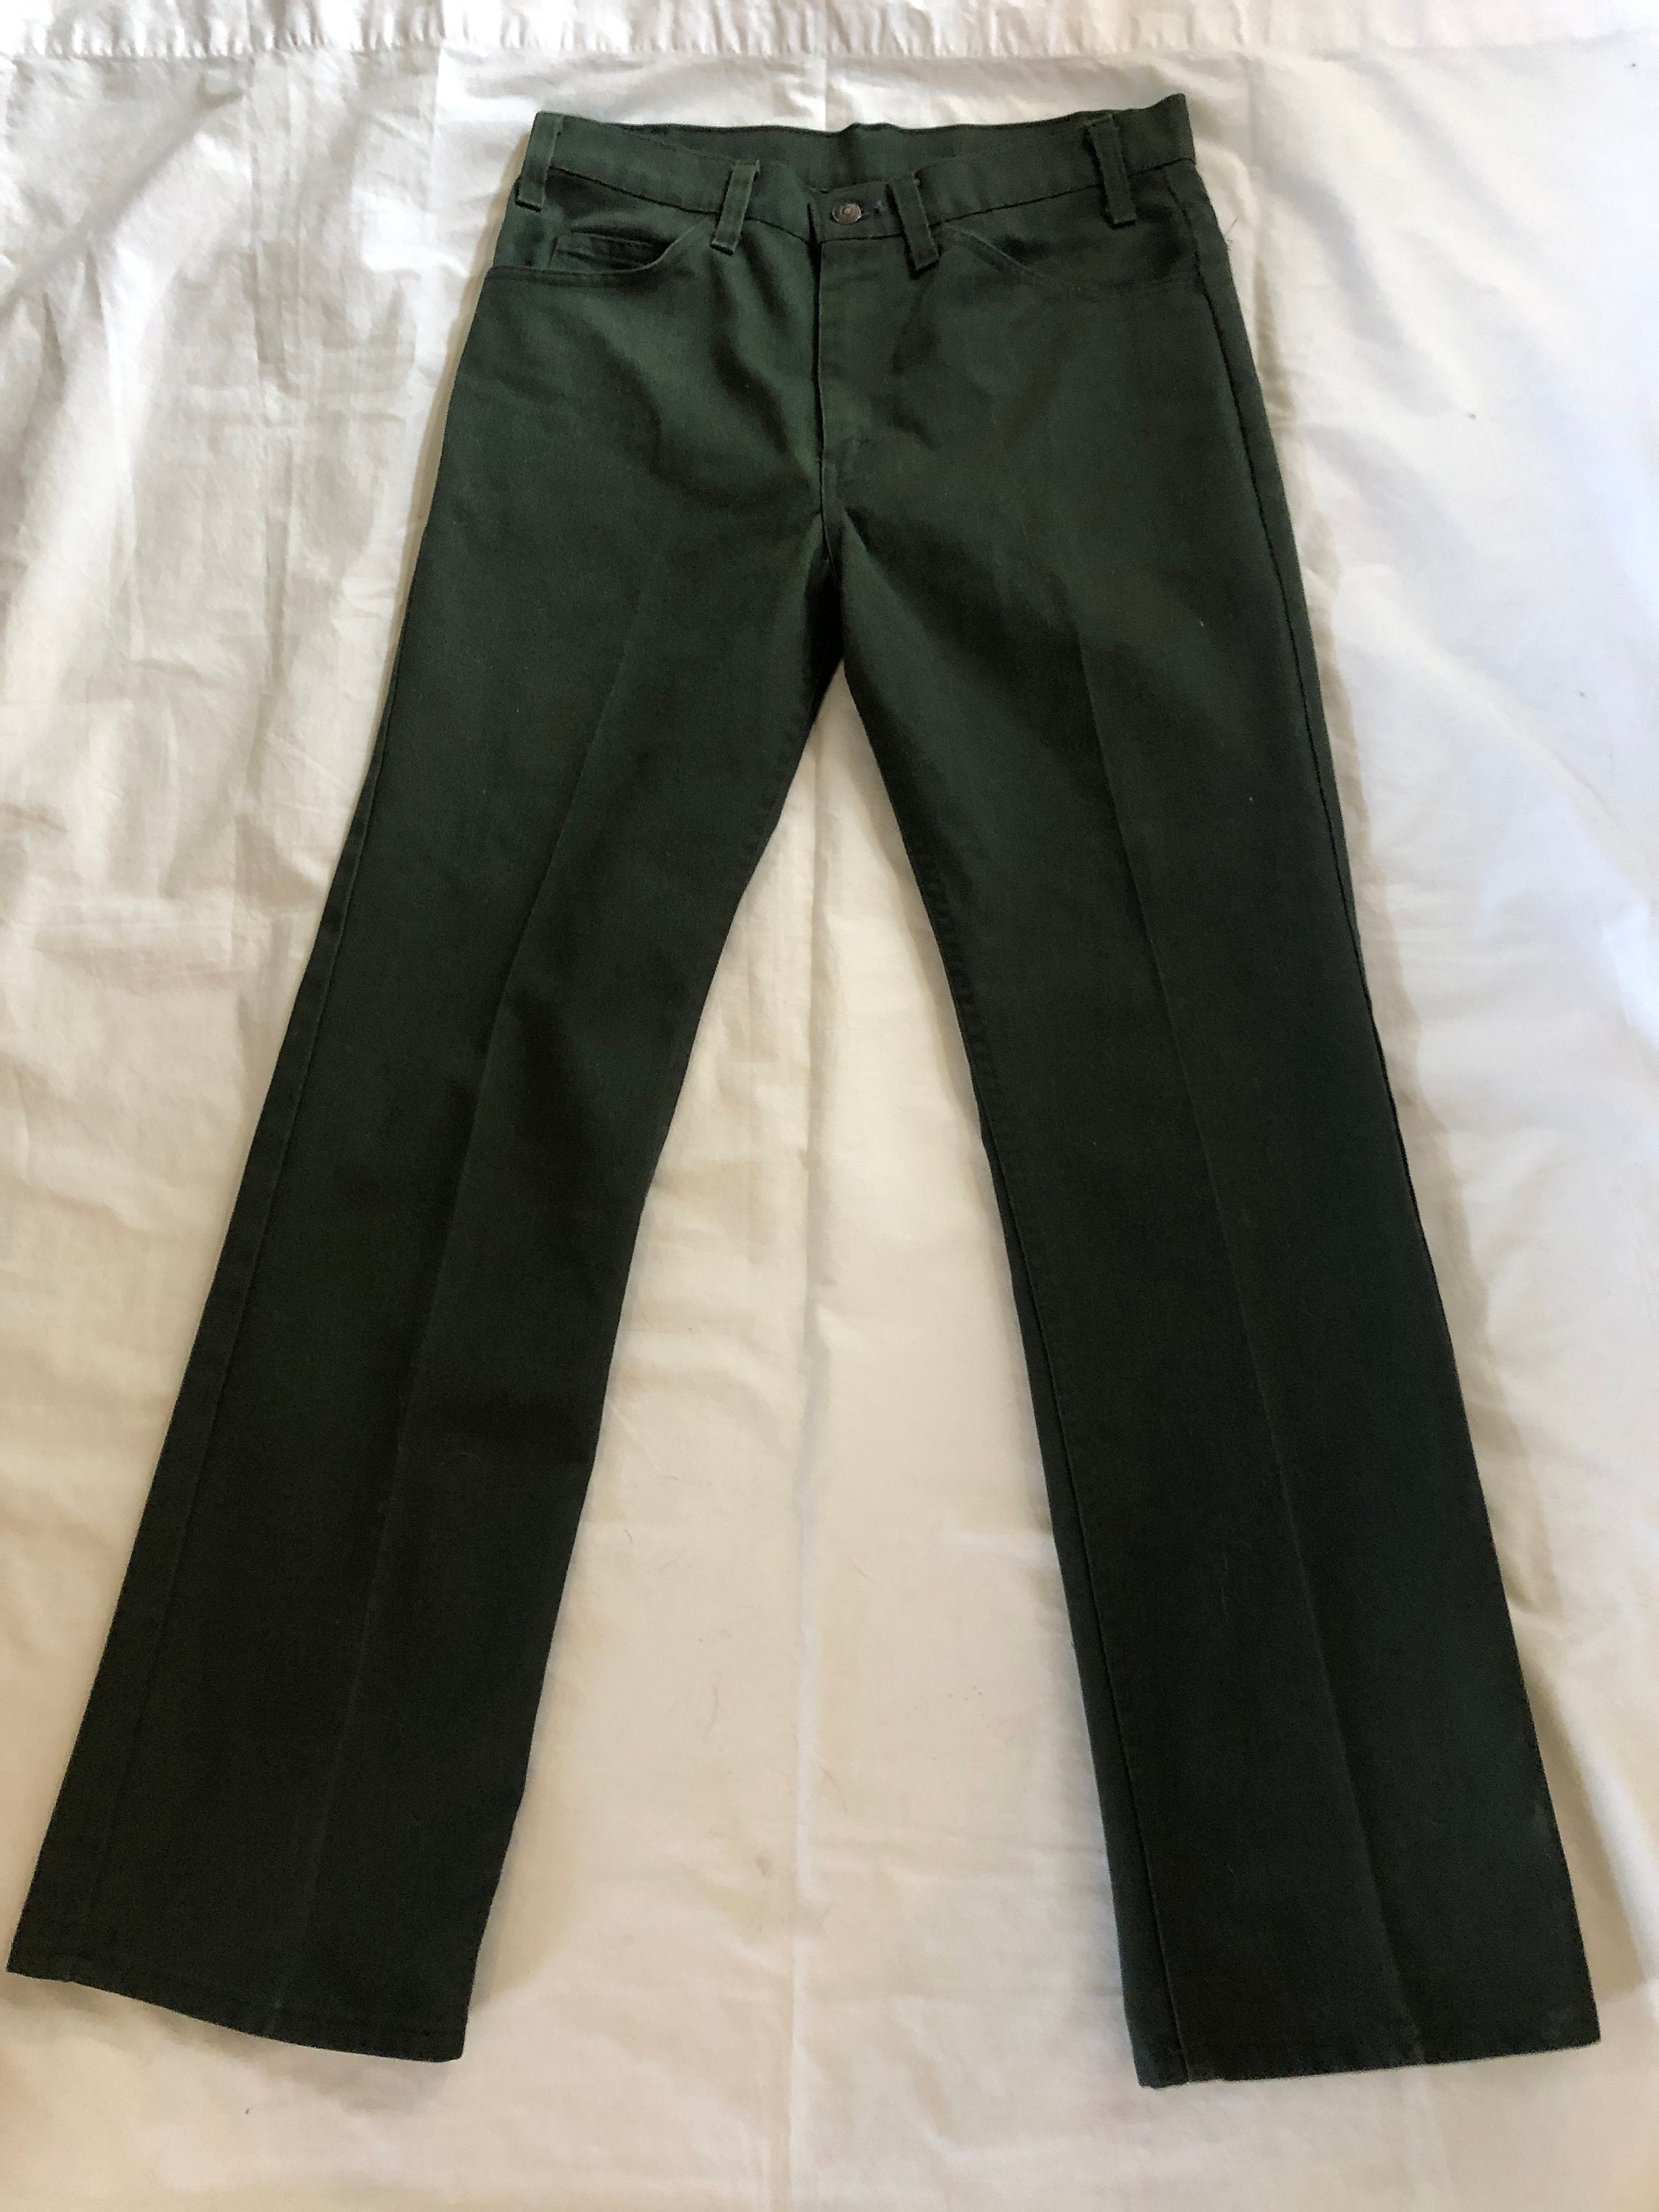 Levis Olive Green - Etsy